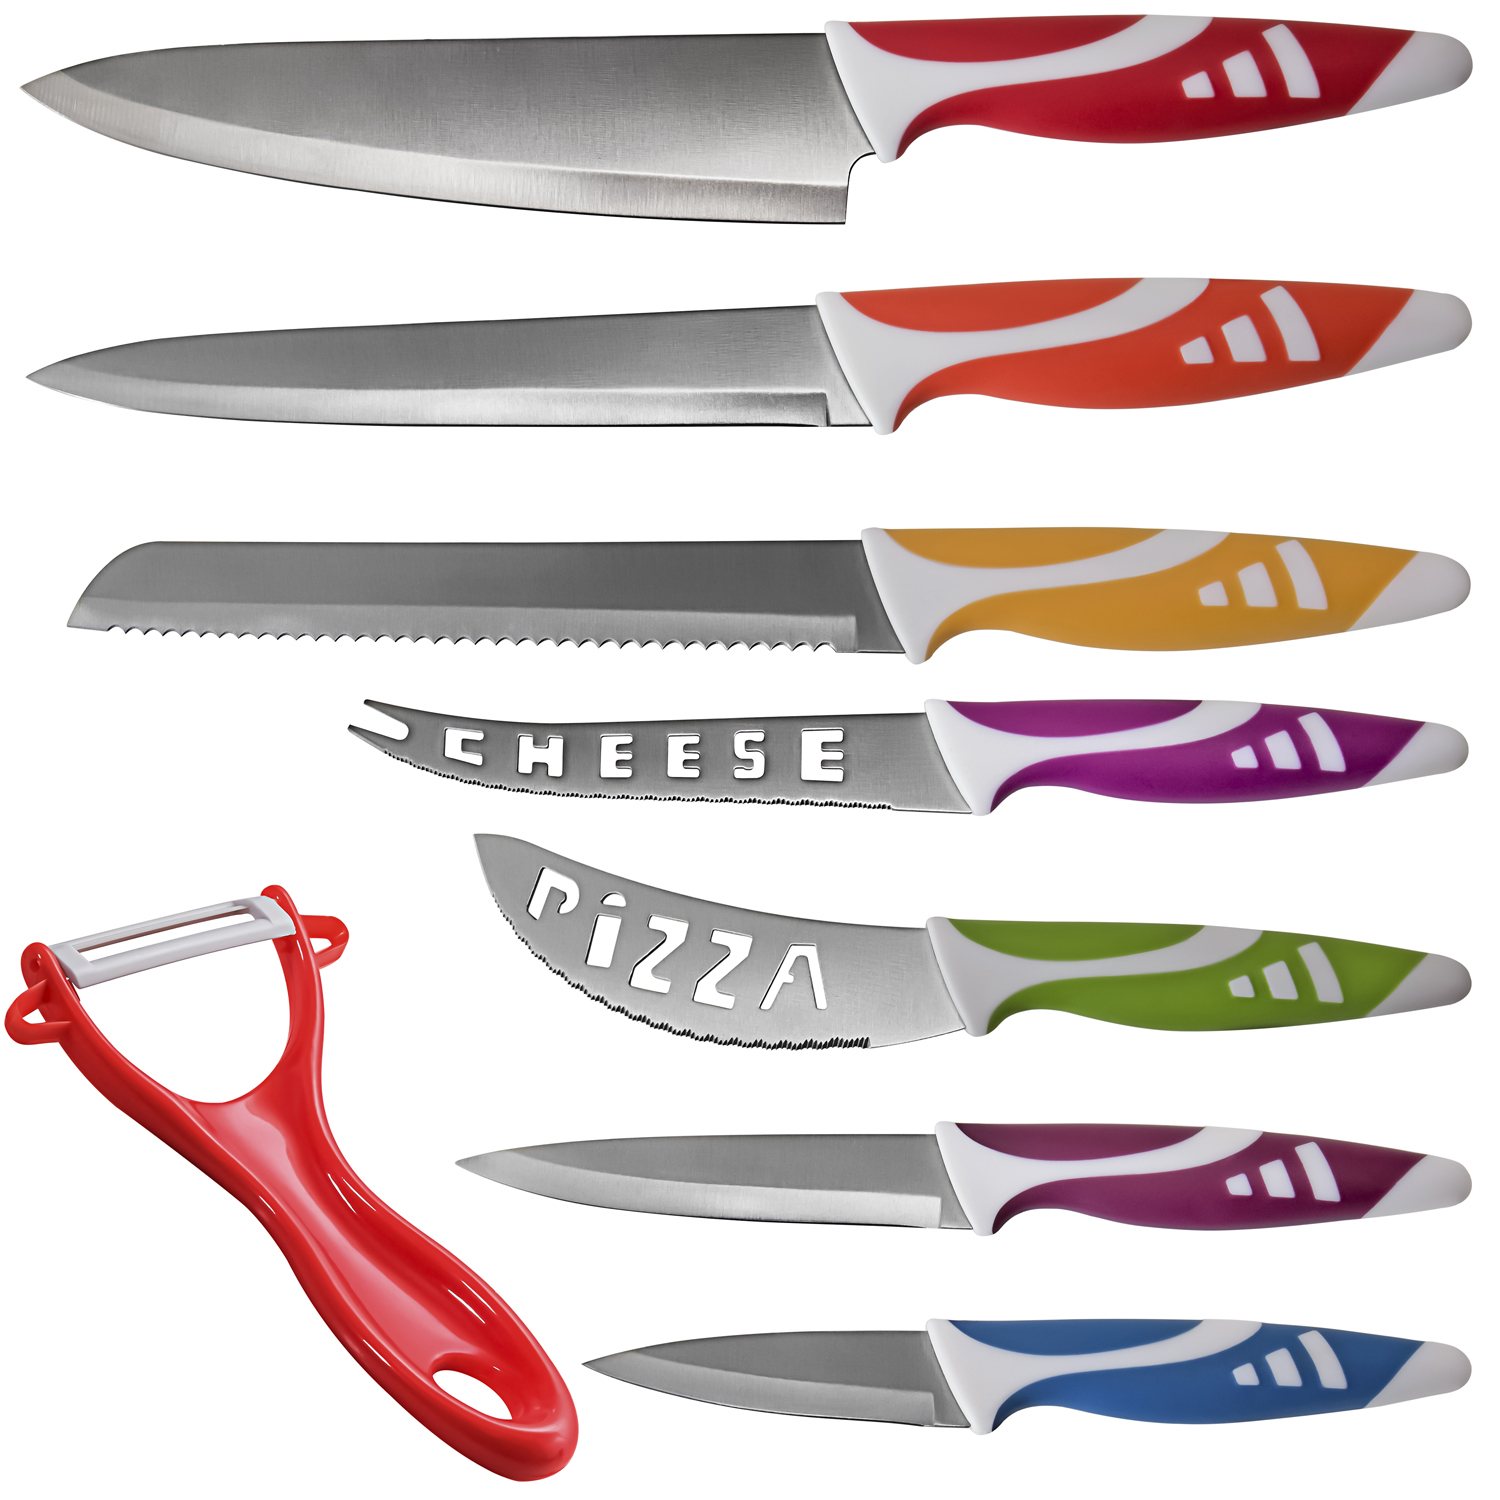 8-piece professional chef knife set for $10, free shipping